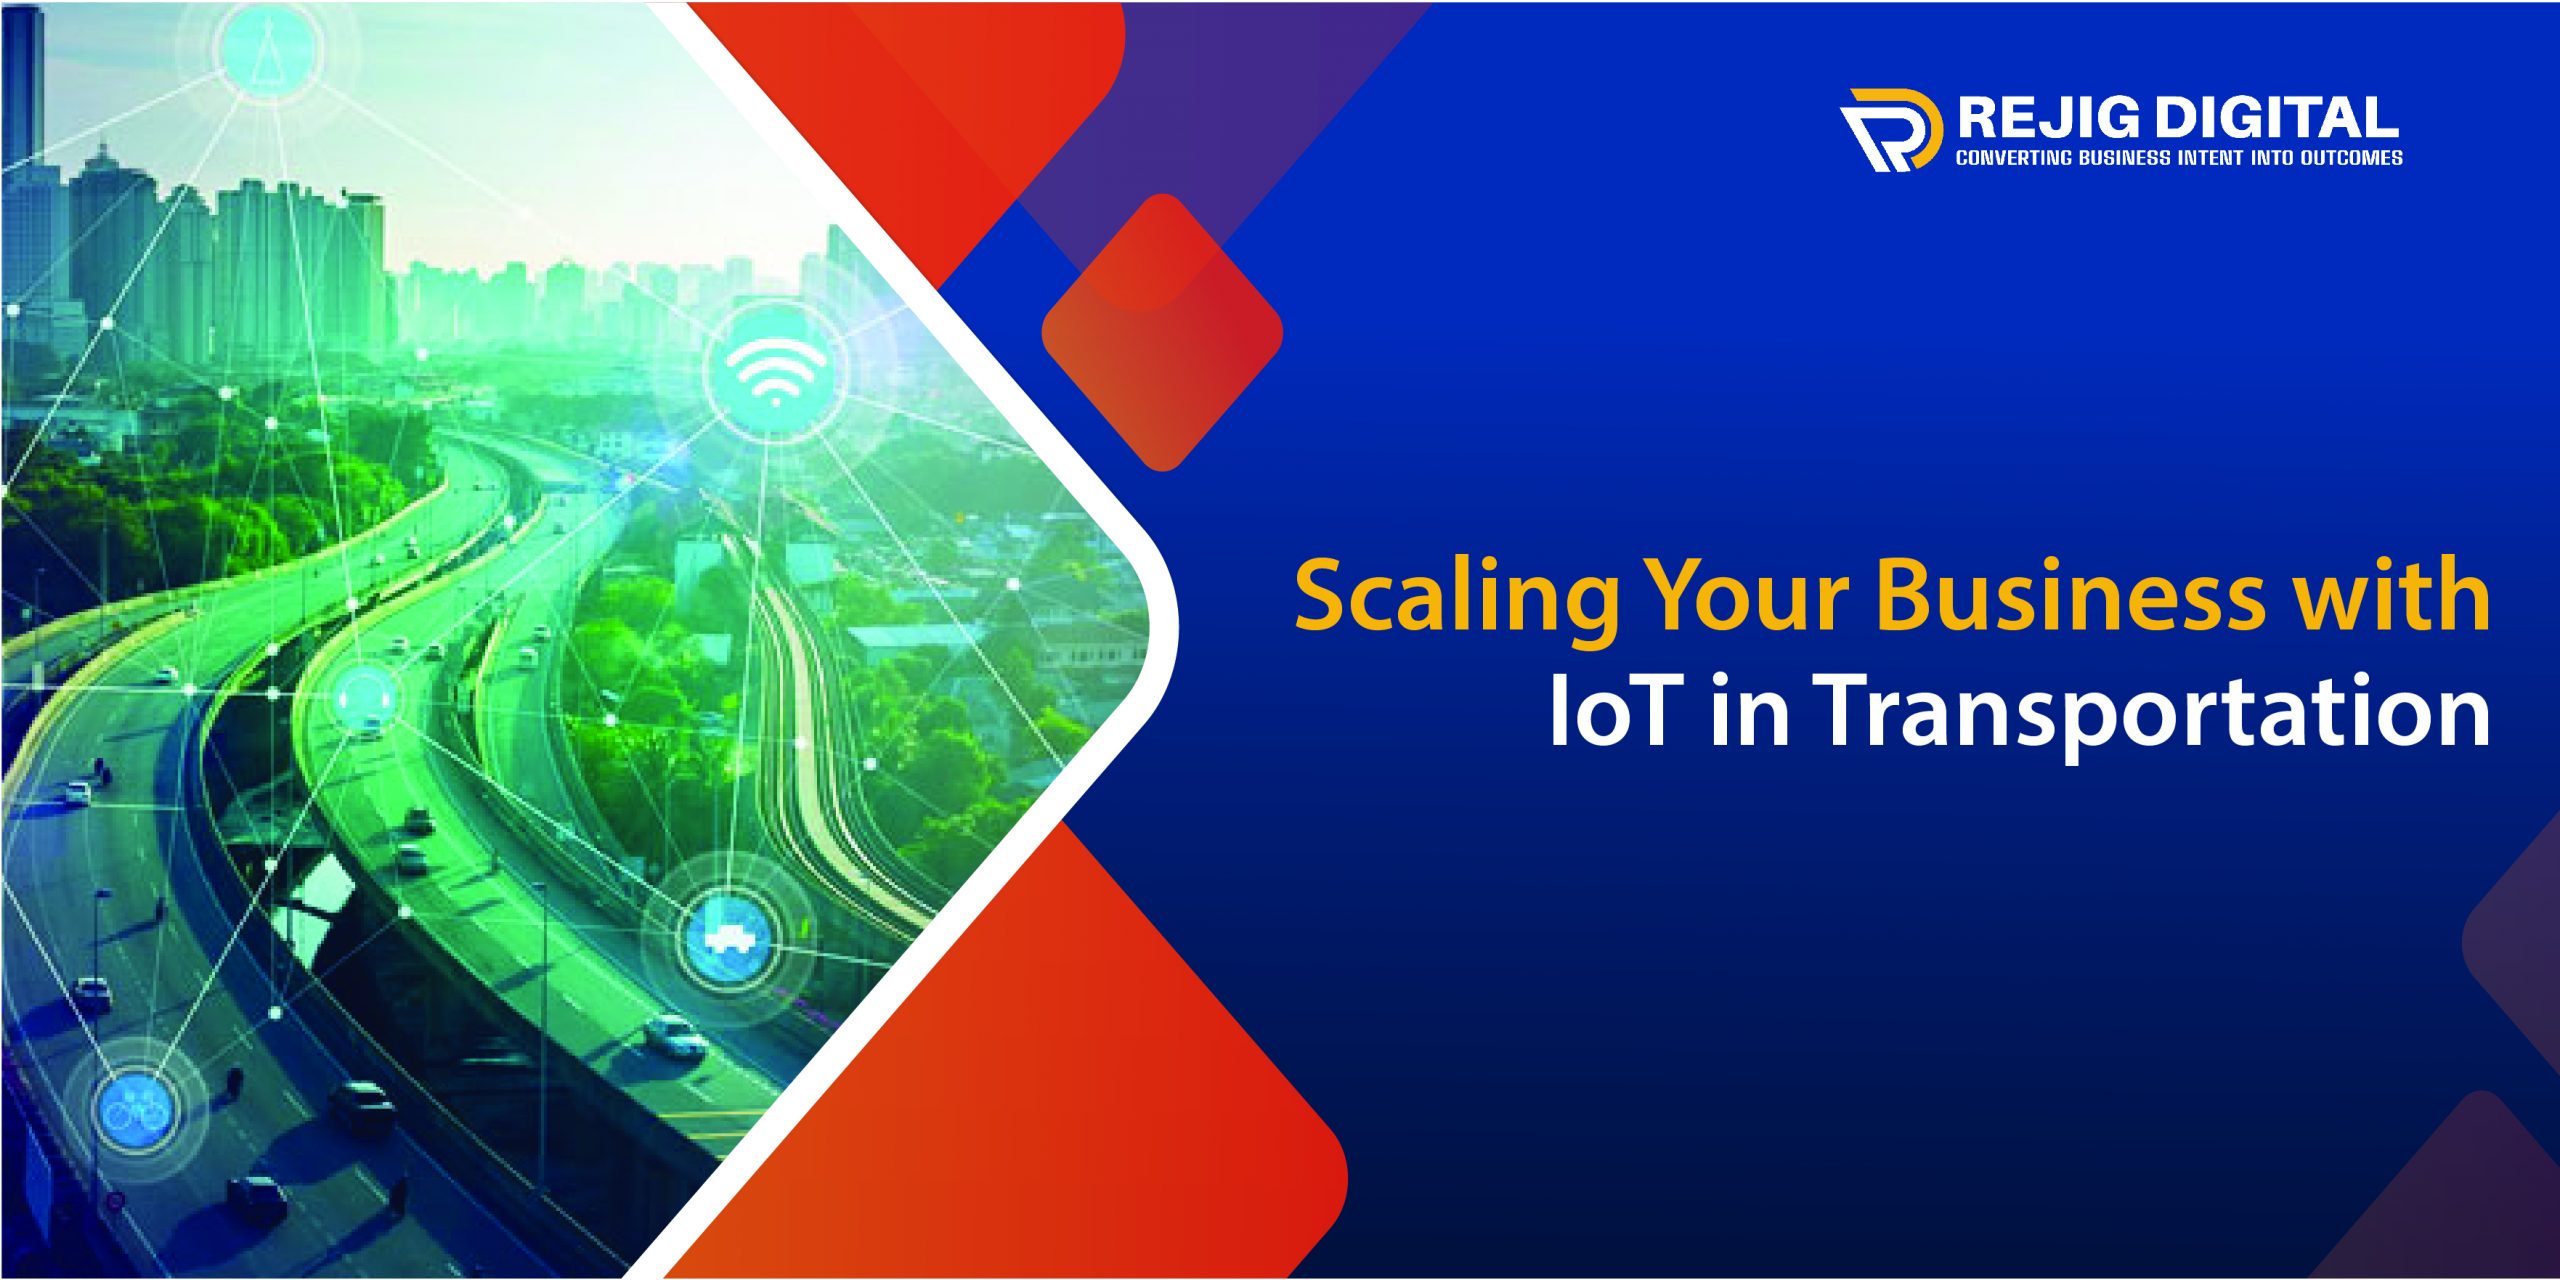 IoT in Transportation: Benefits and Smart Applications that Scale Your Businesses